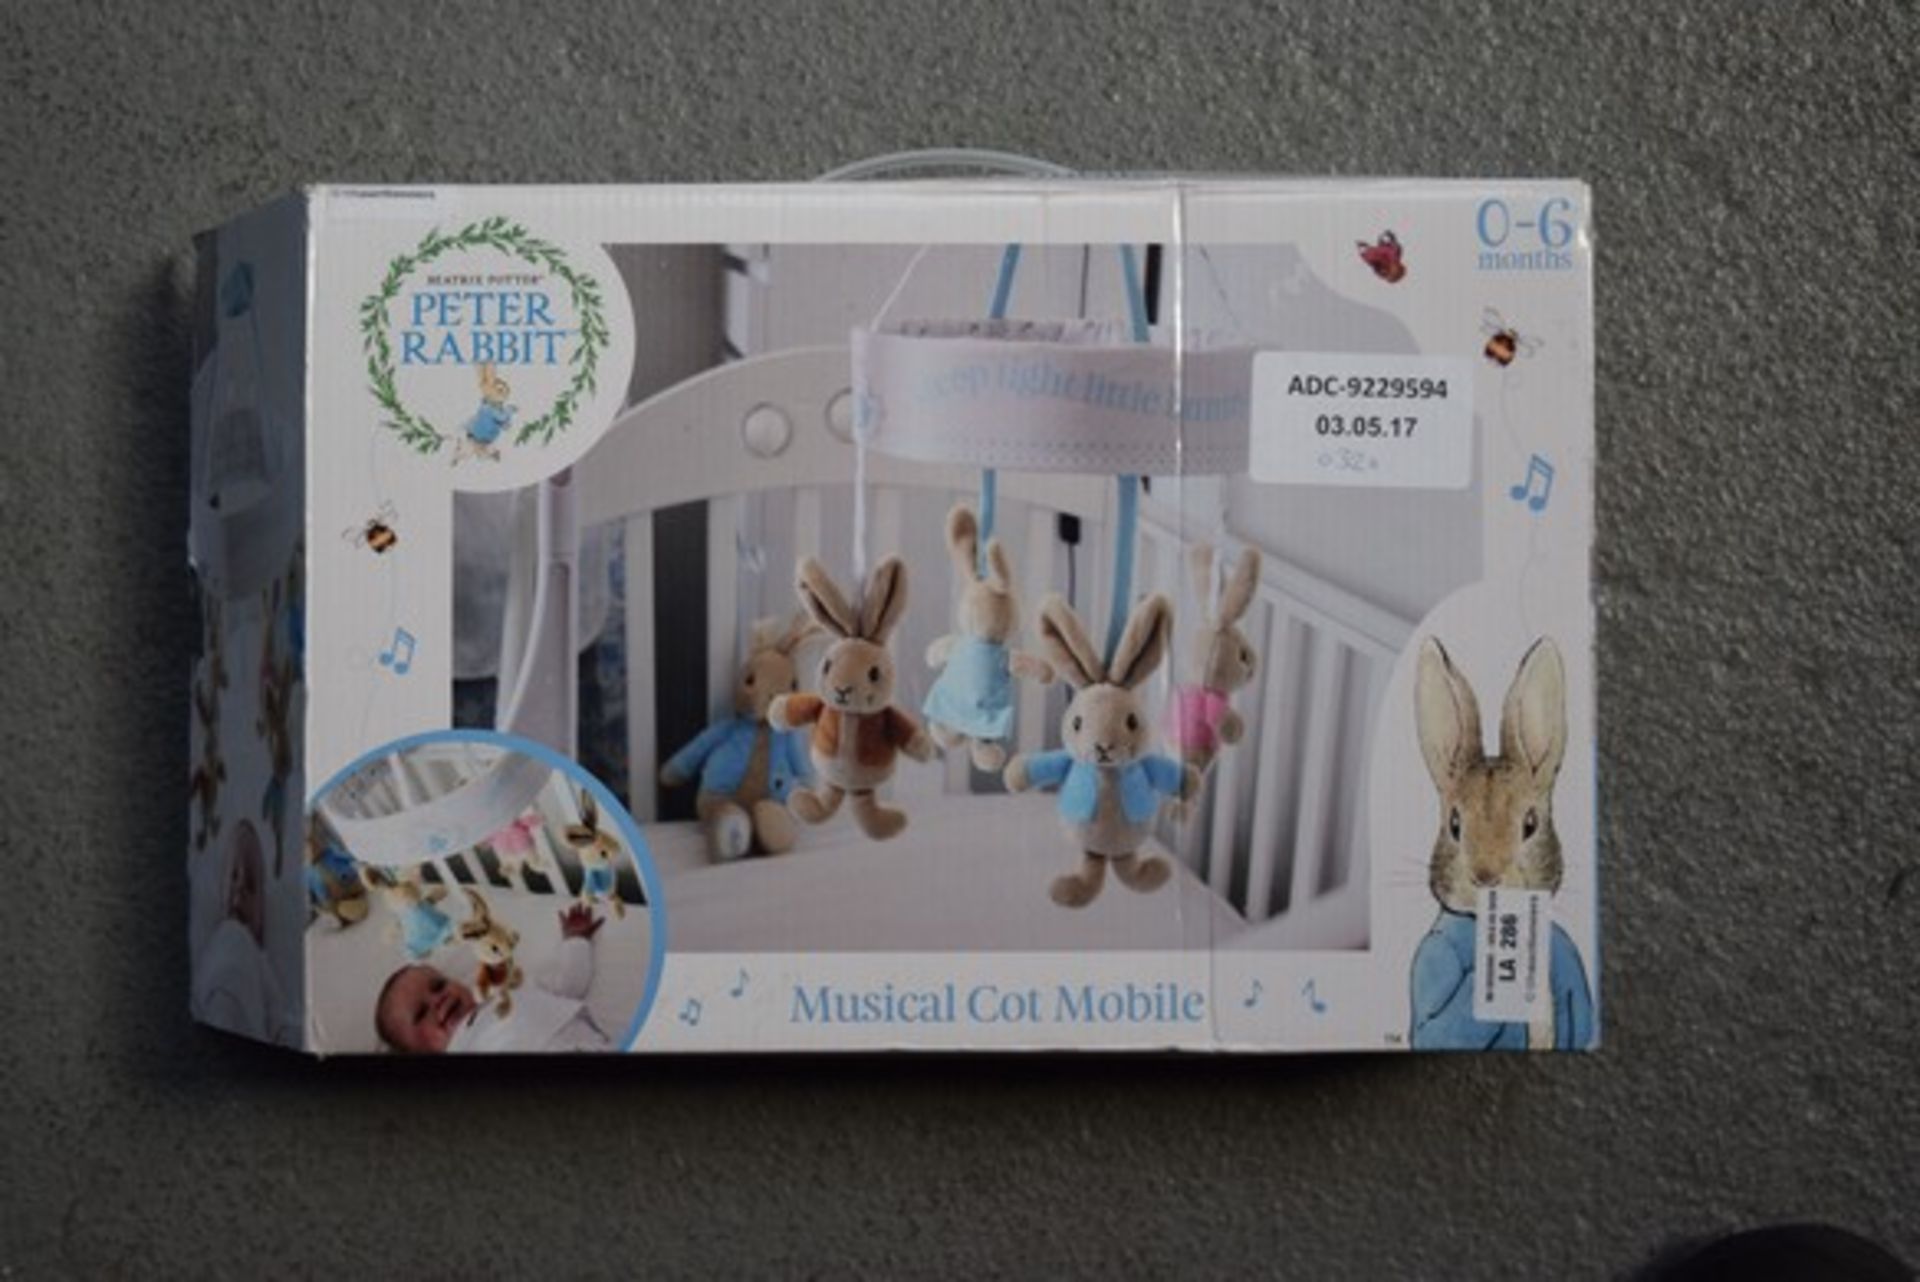 1 x BOXED PETER RABBIT MUSICAL COT MOBILE RRP £35 03.05.17 *PLEASE NOTE THAT THE BID PRICE IS